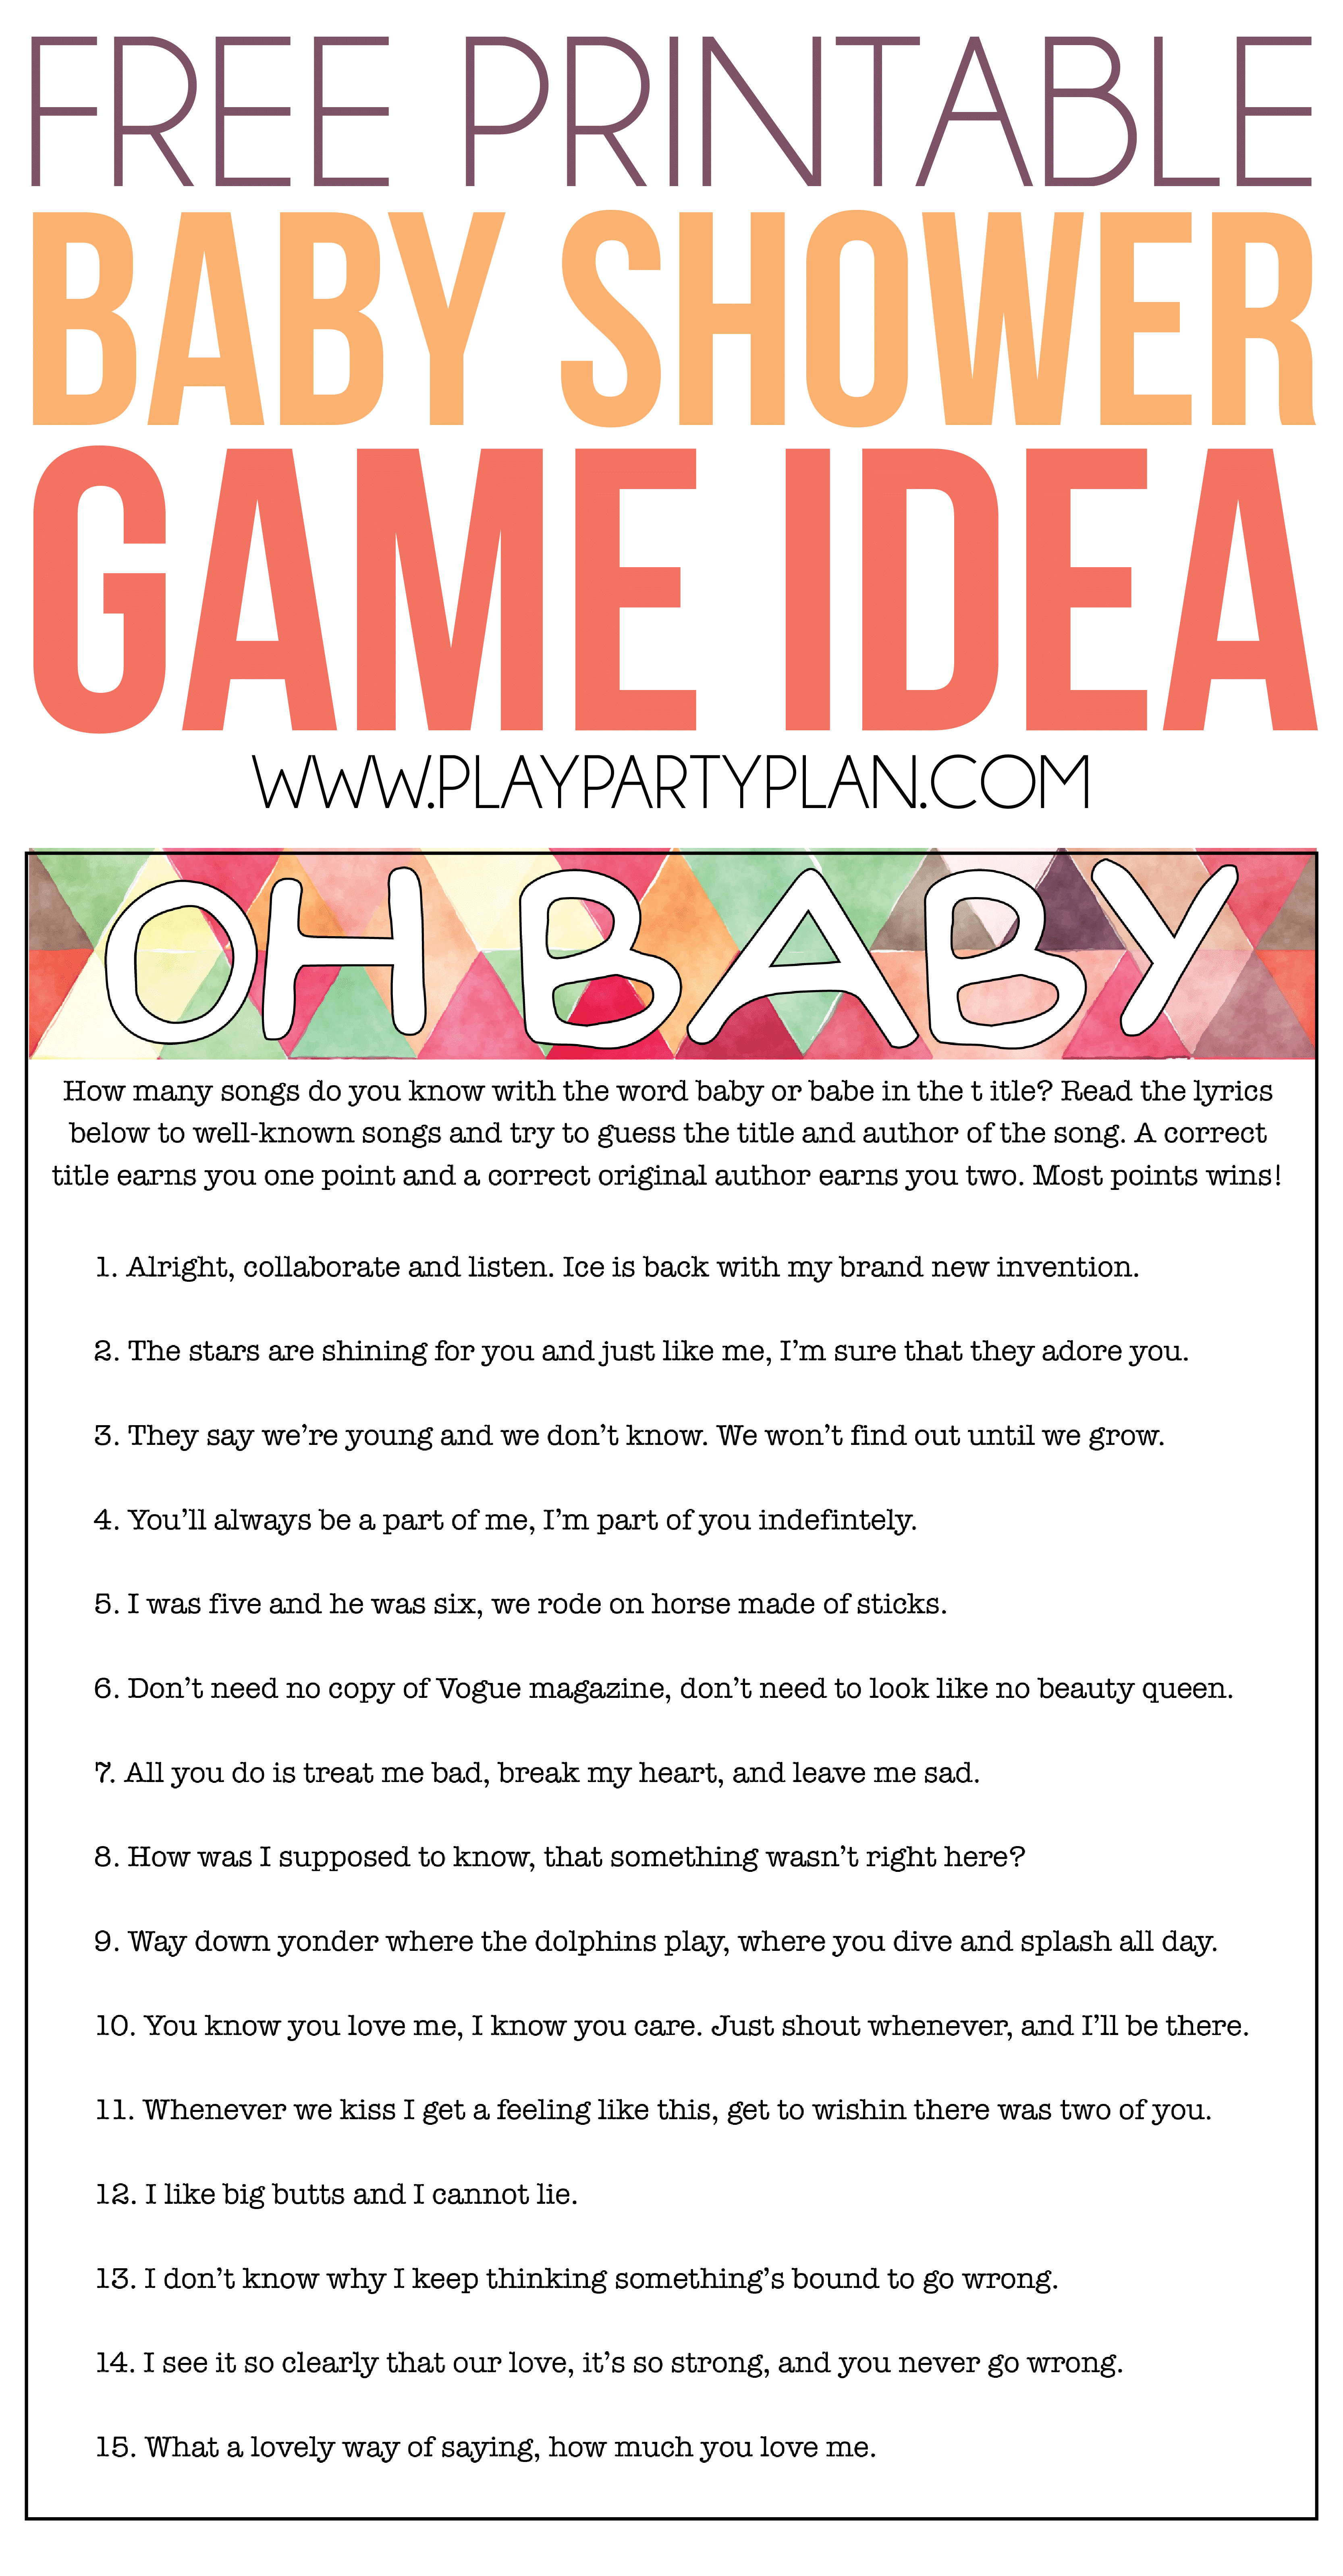 Oh Baby! Free Printable Baby Shower Game Expecting Moms Will Love - Free Printable Baby Shower Games